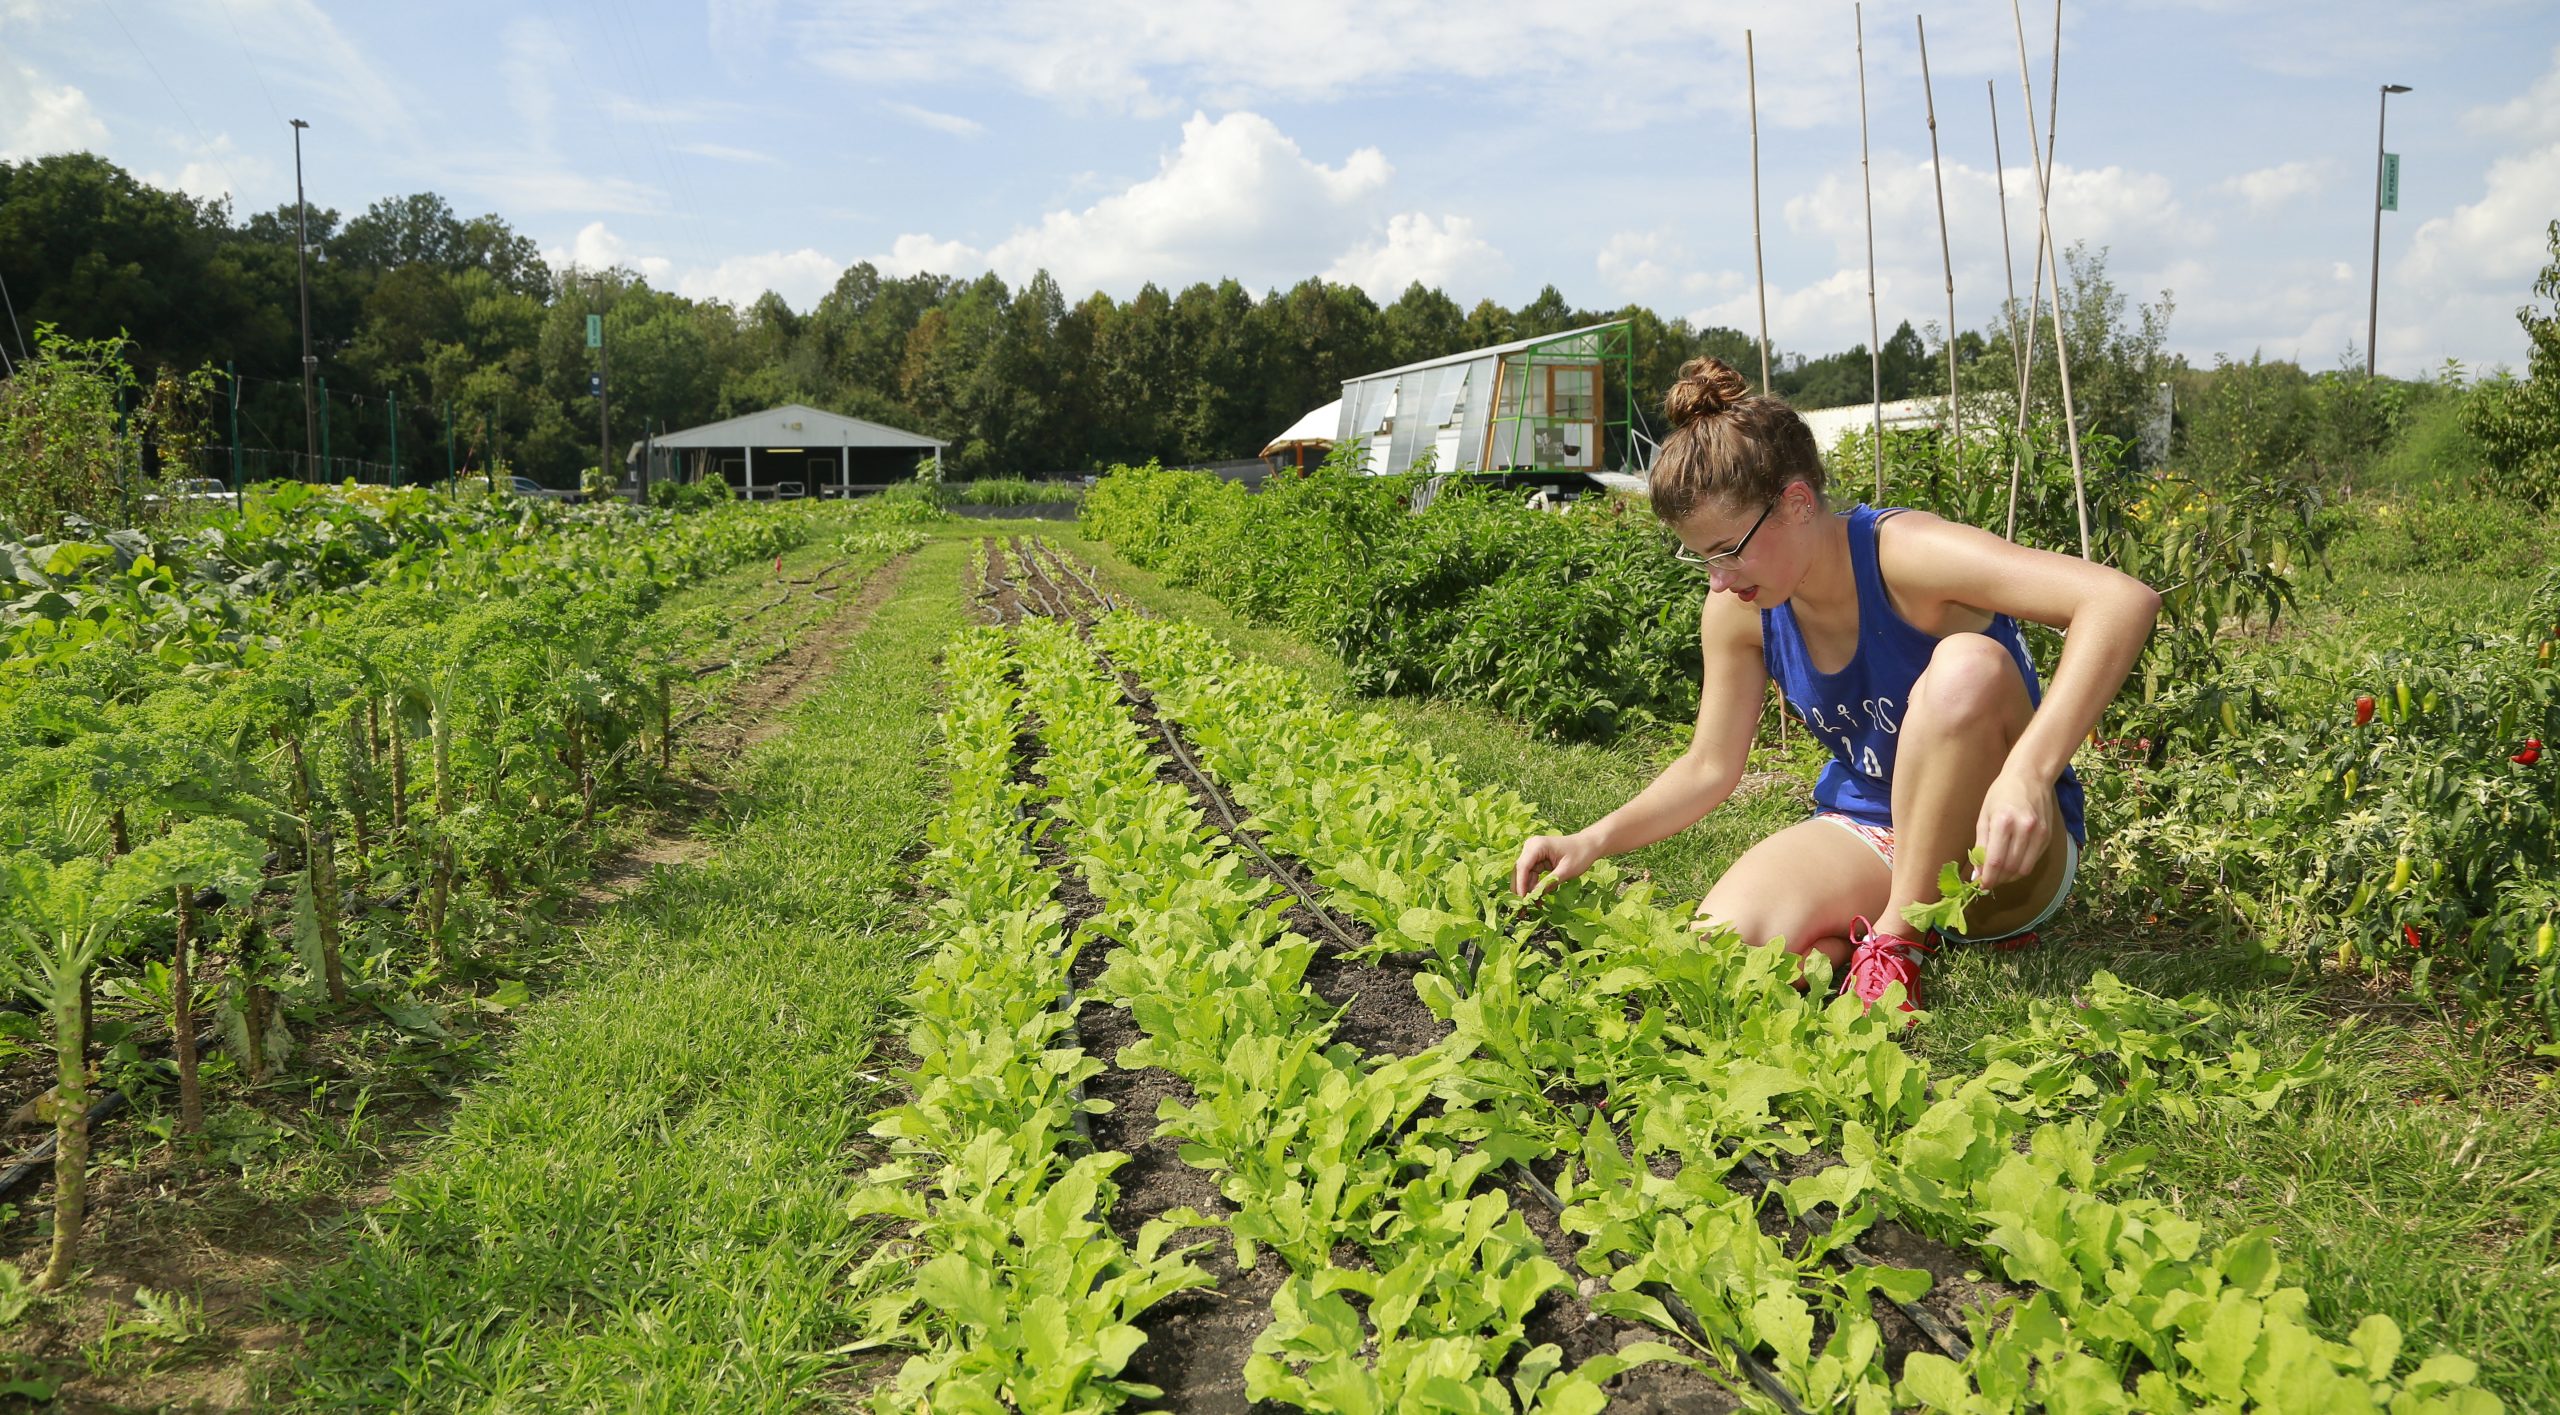 Marissa Byers at The Farm at Butler checking on some plants